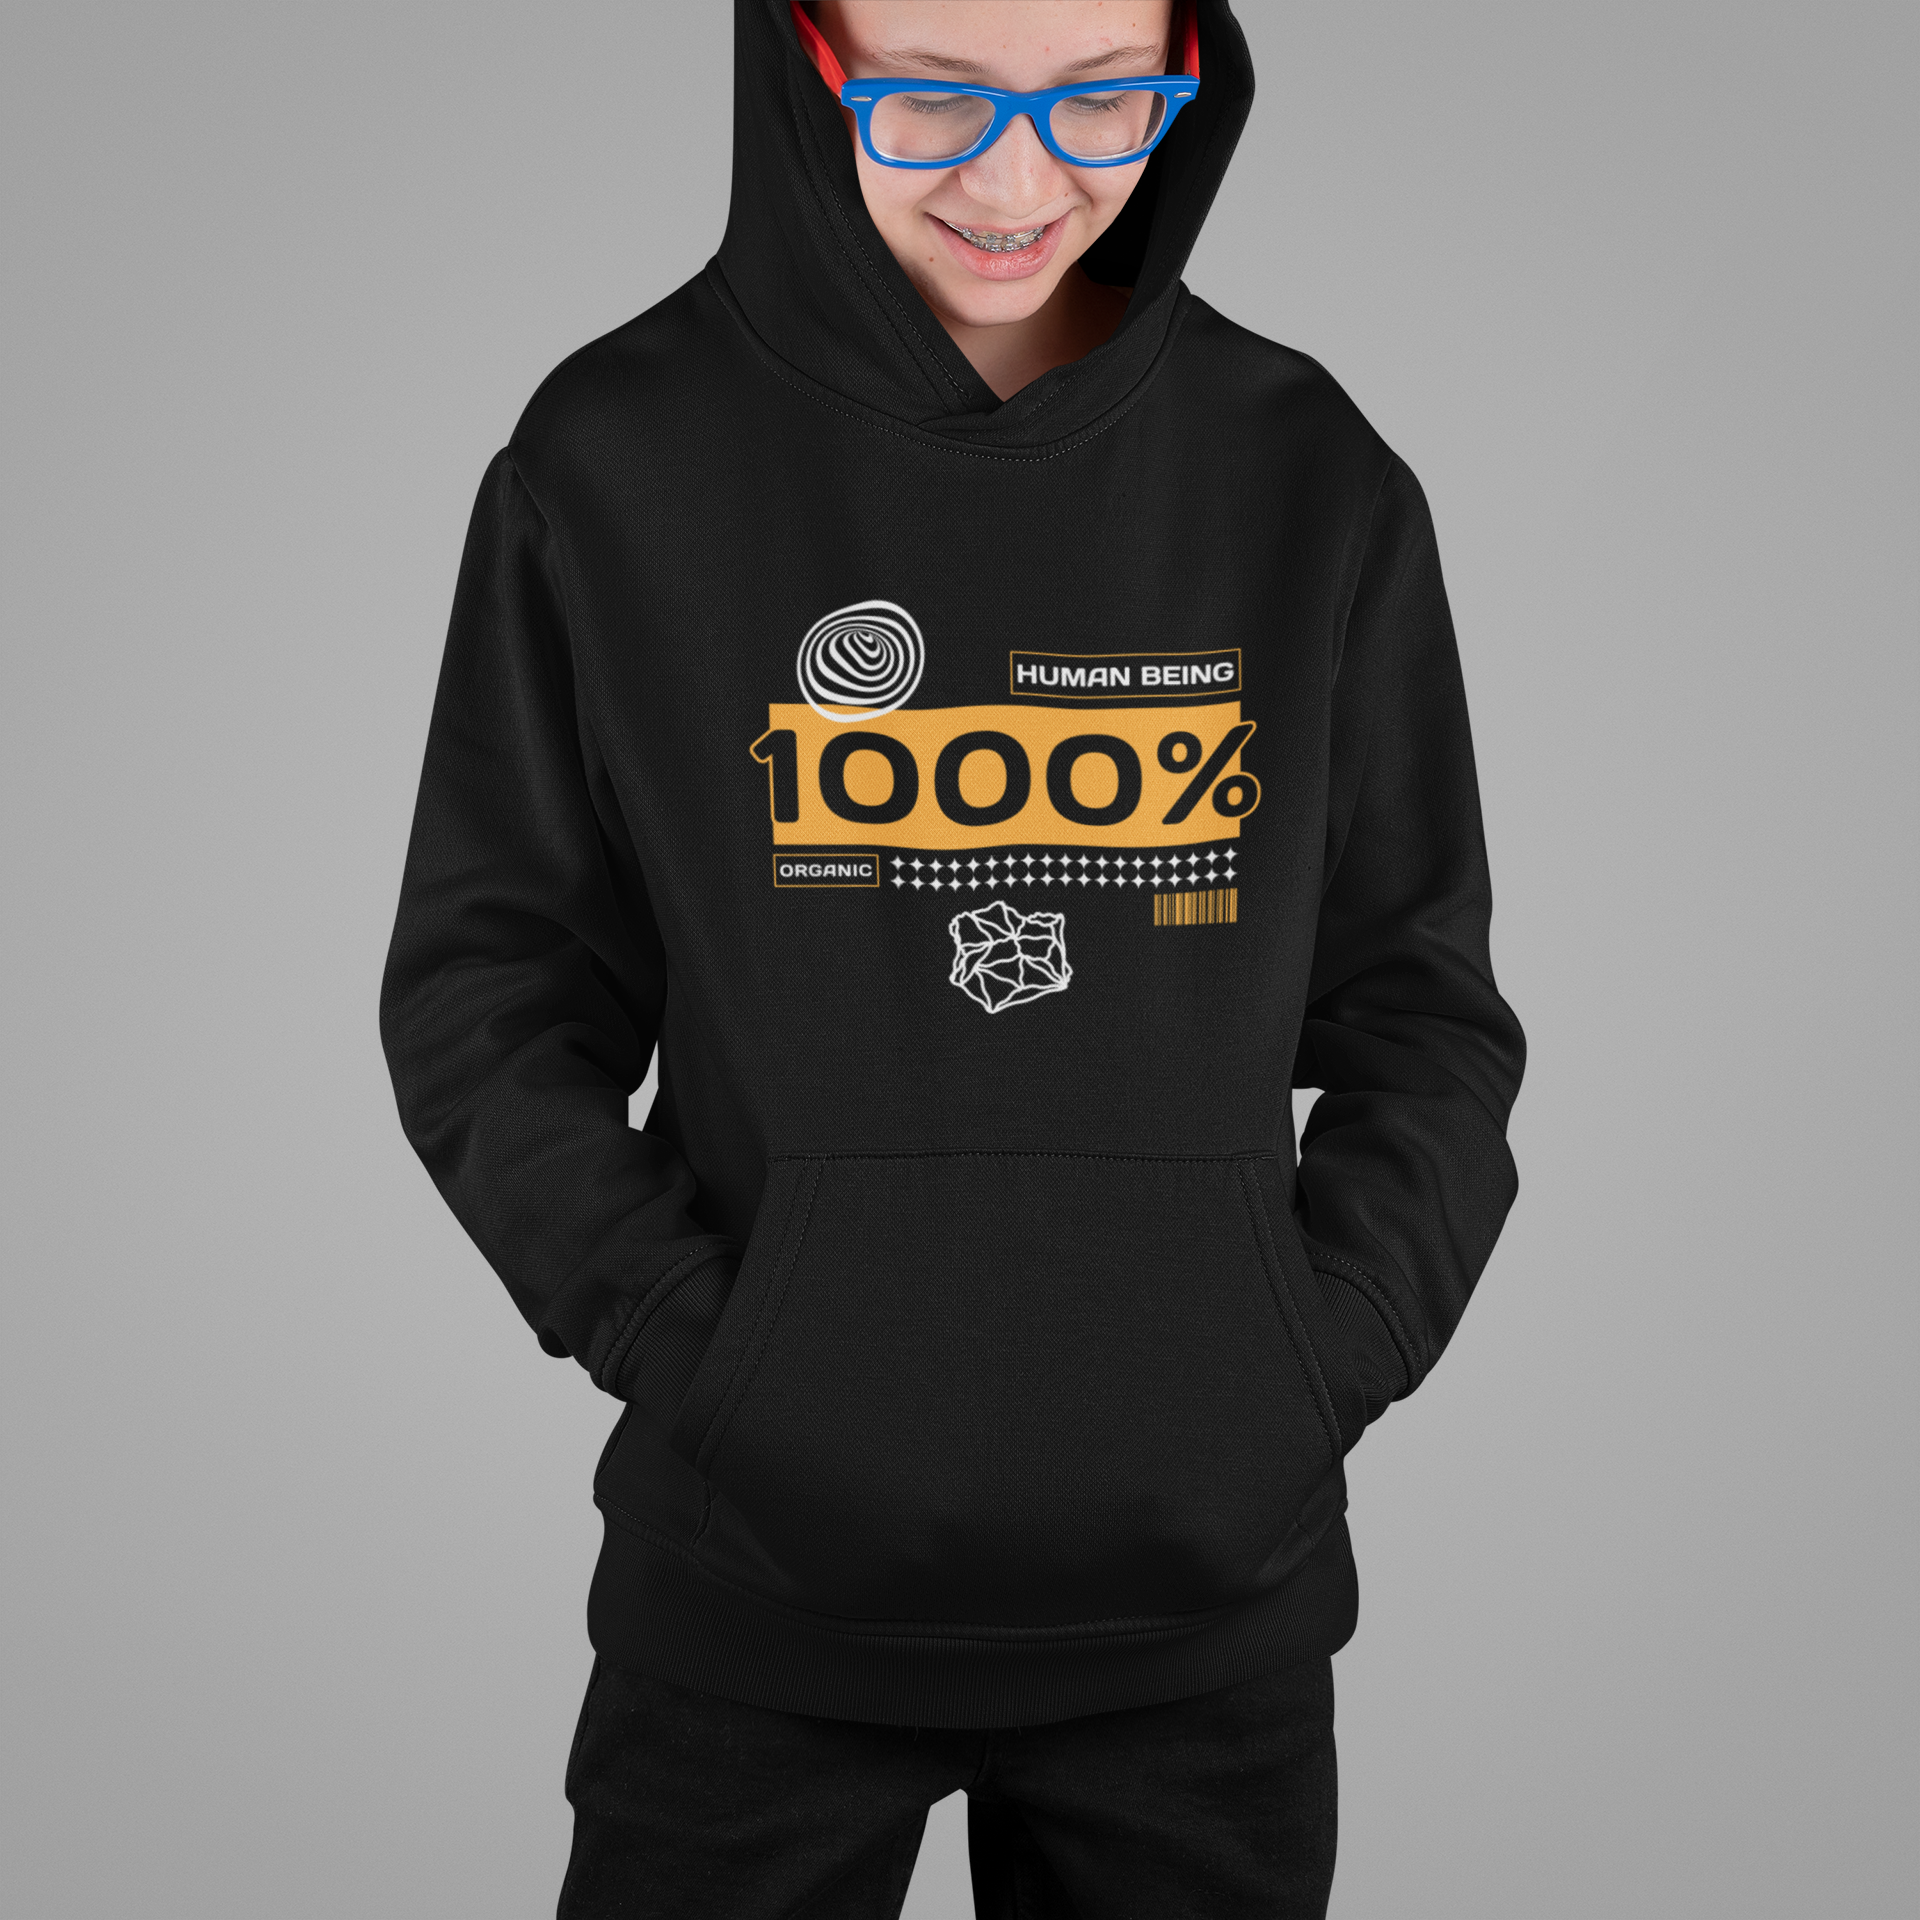 pullover-hoodie-mockup-featuring-a-boy-with-glasses-m714.png